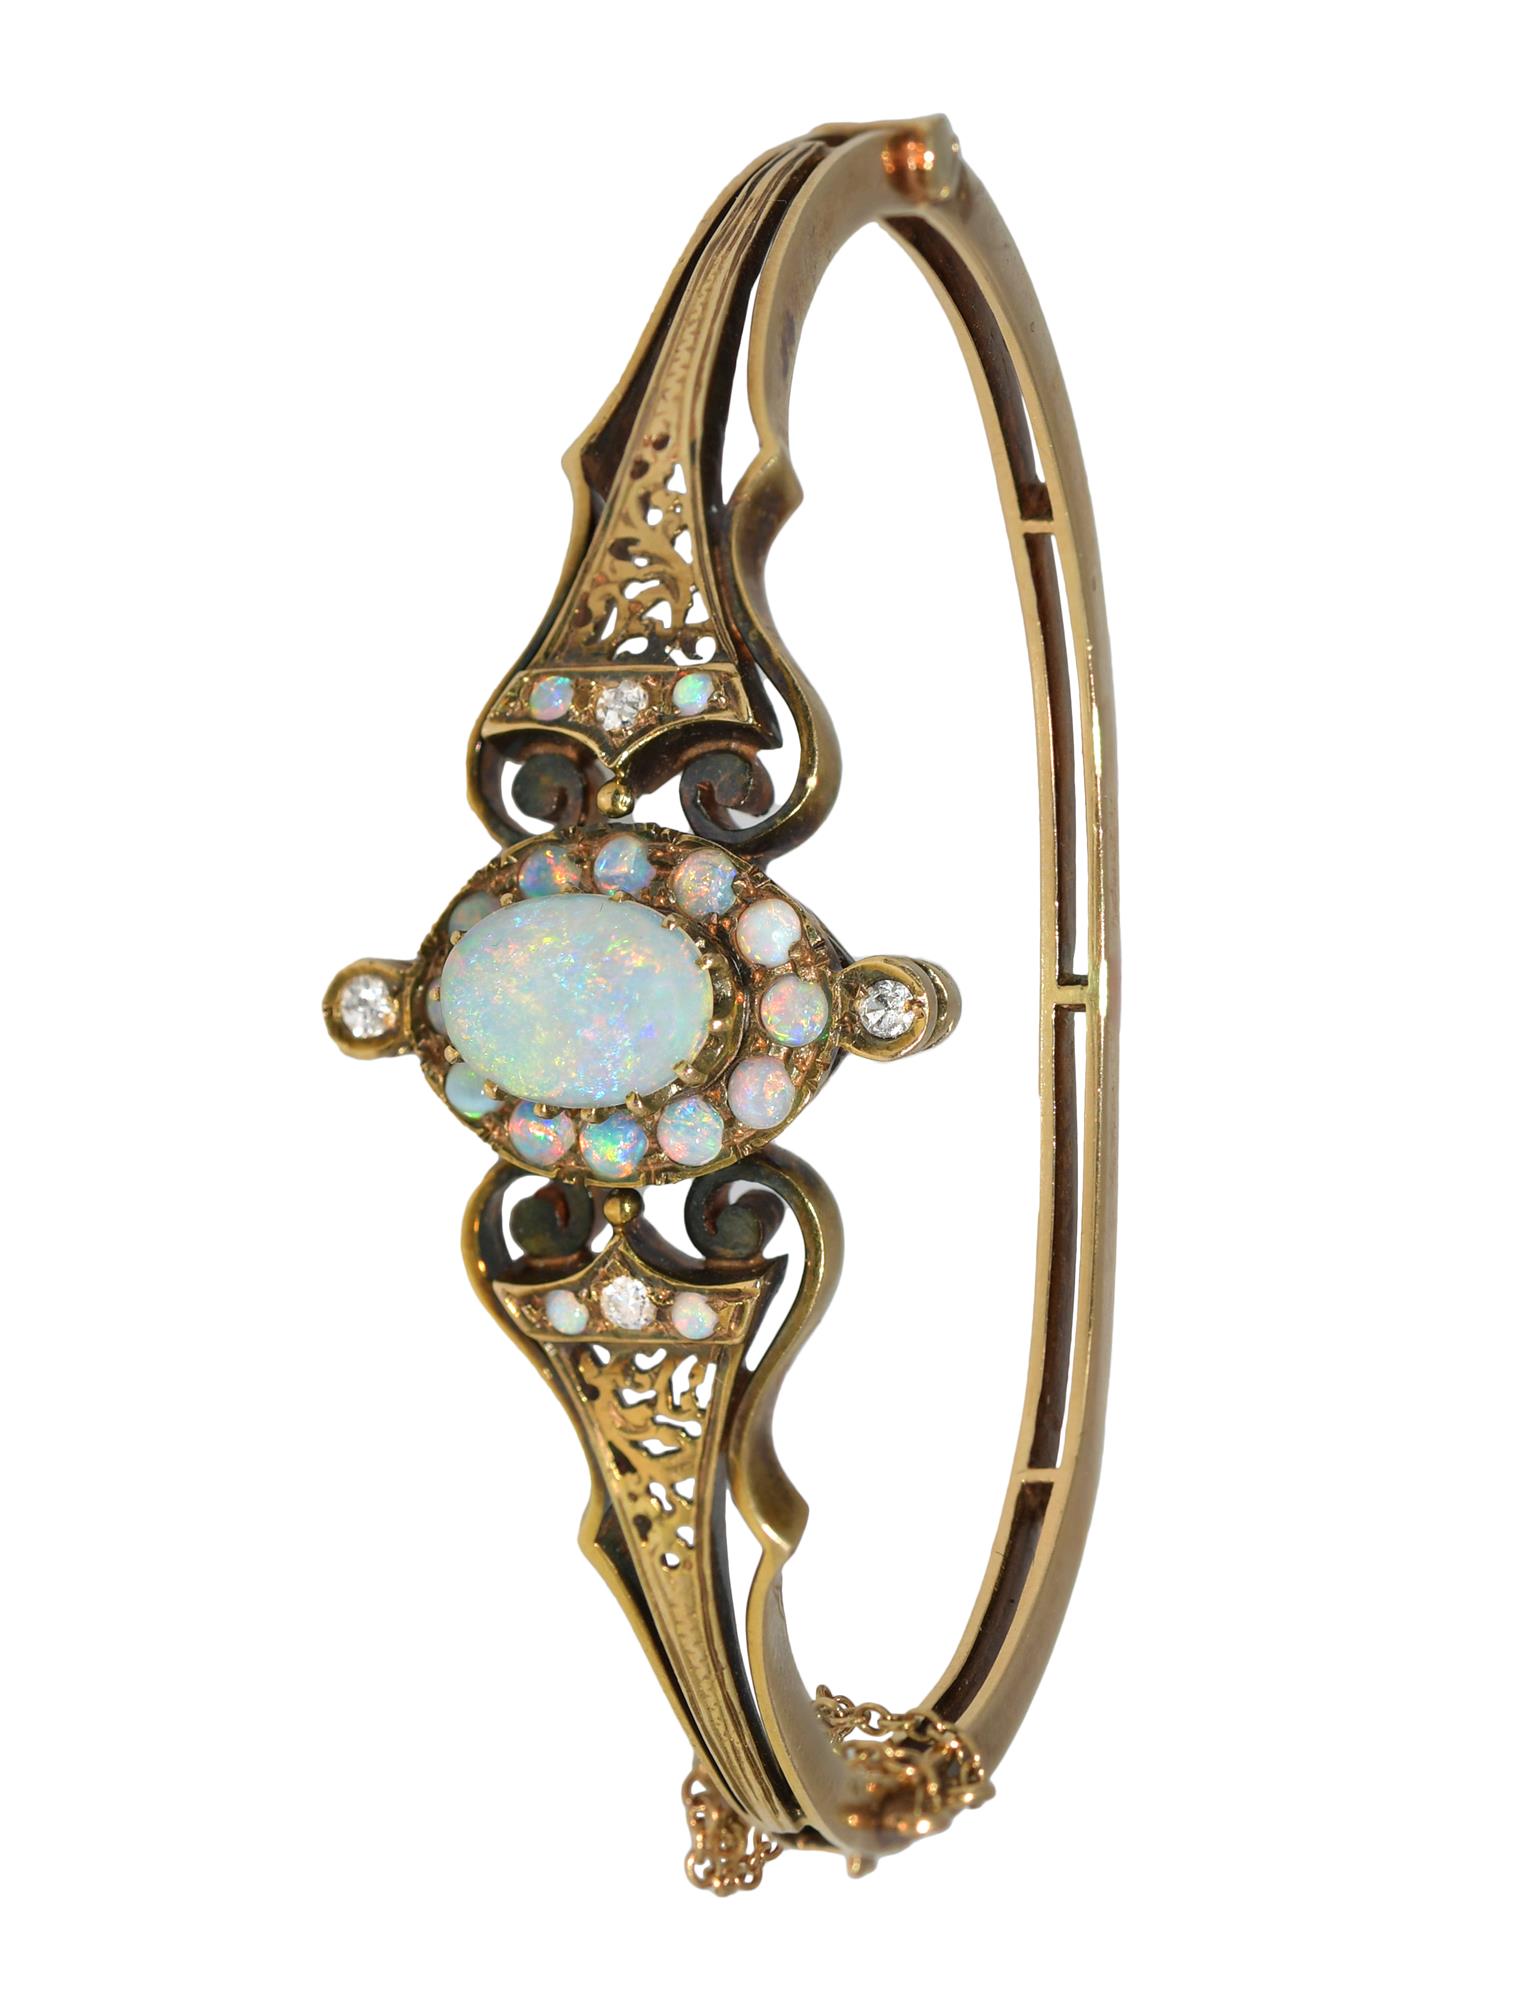 ANTIQUE 14K GOLD OPAL AND DIAMOND